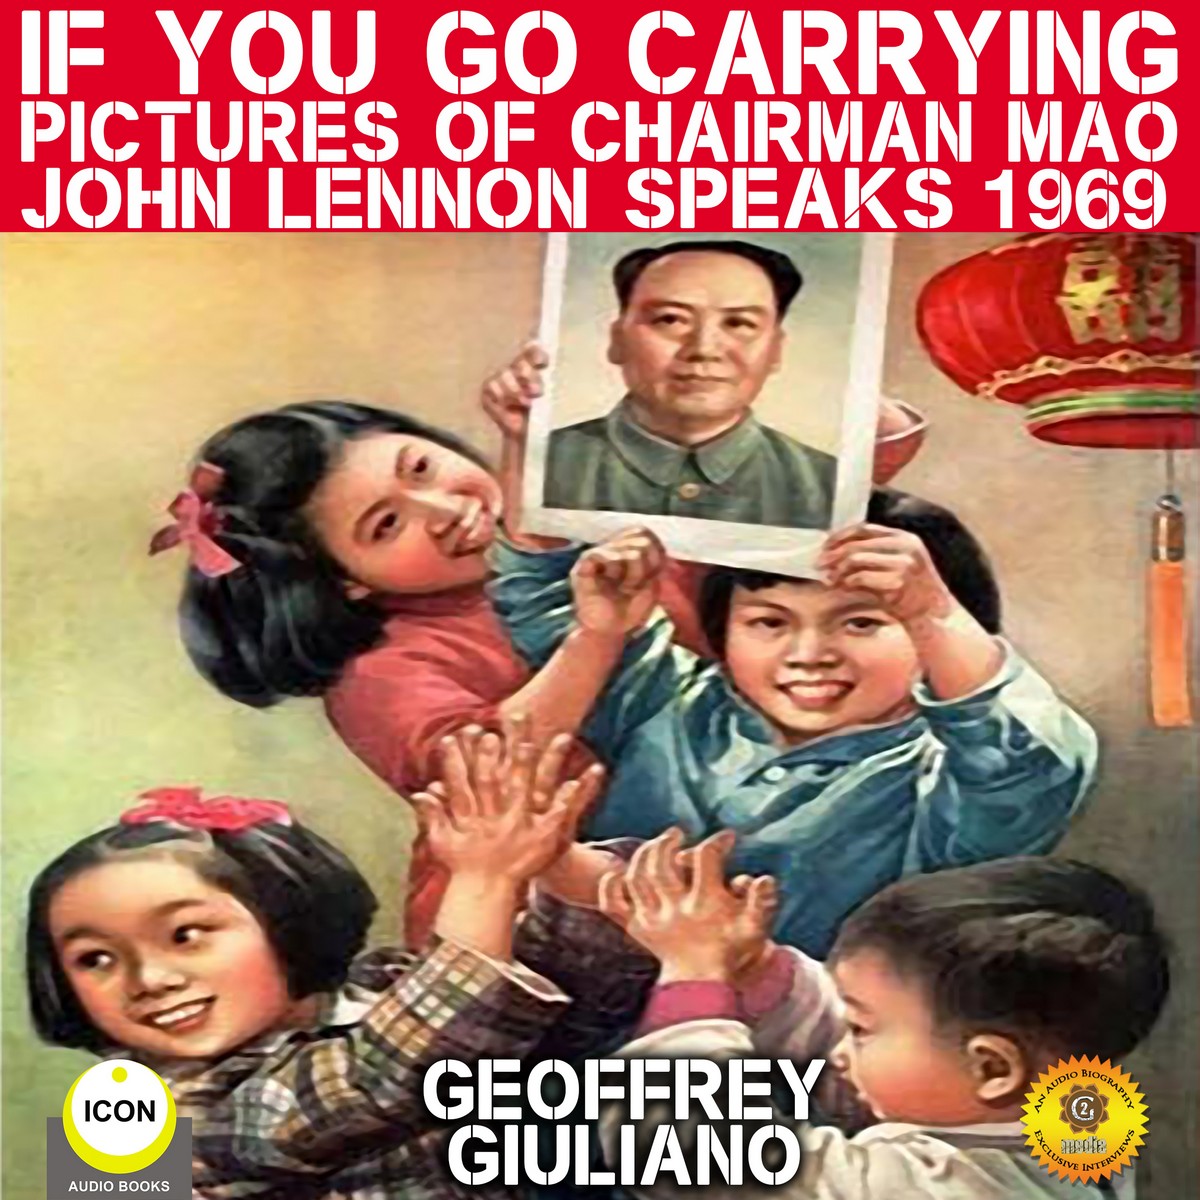 If You Go Carrying Pictures Of Chairman Mao – John Lennon Speaks 1969